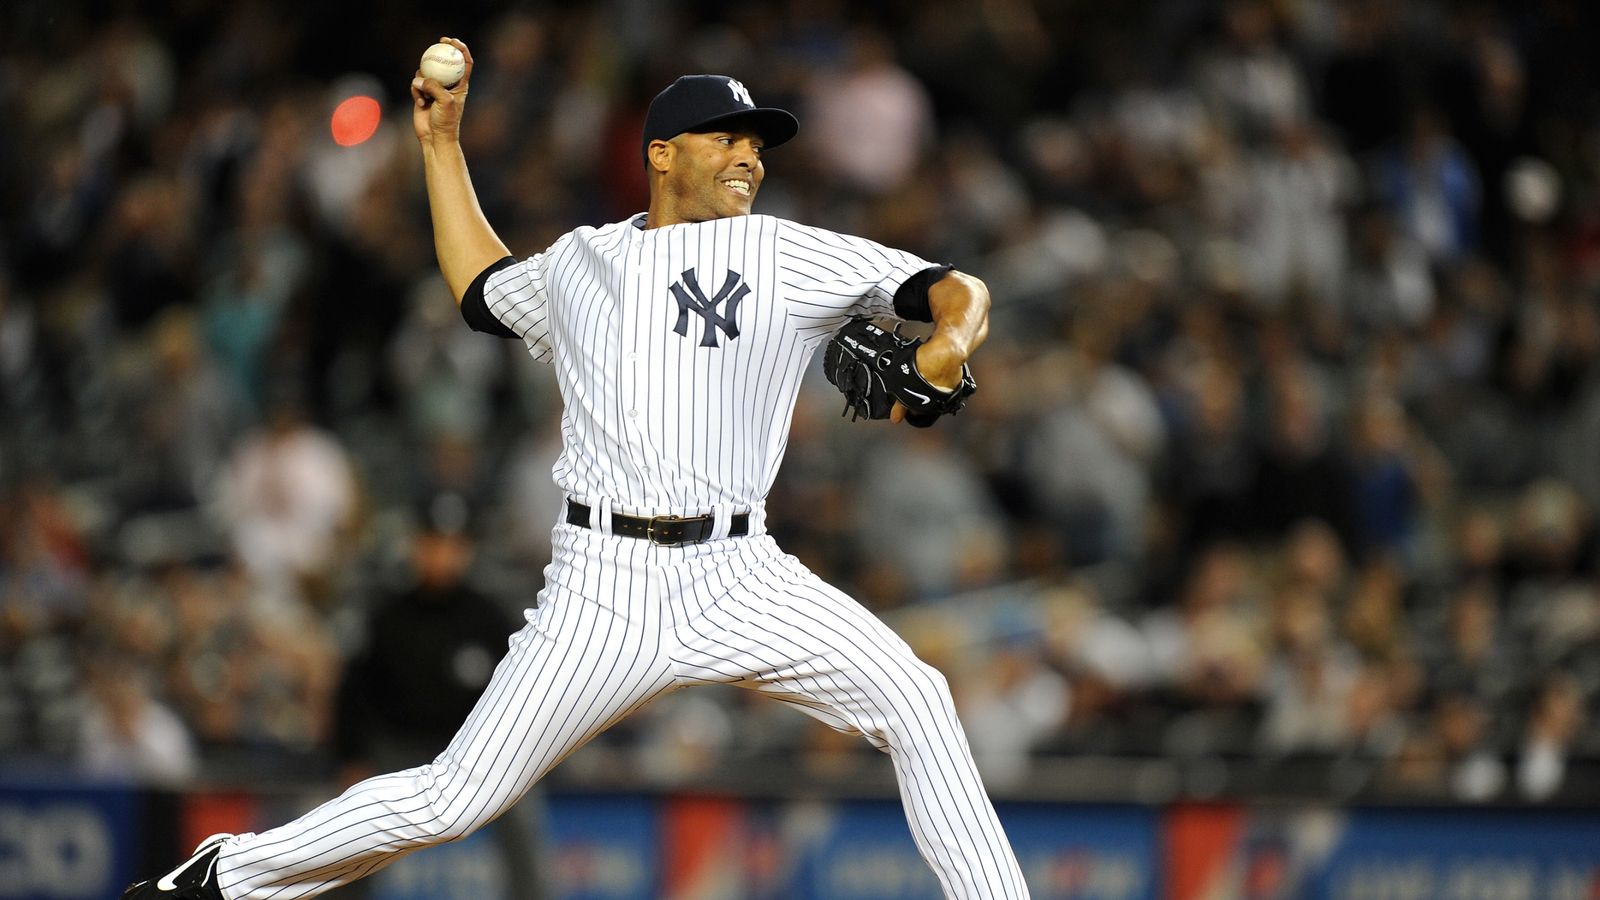 Mariano Rivera selected to Baseball HOF by unanimous decision